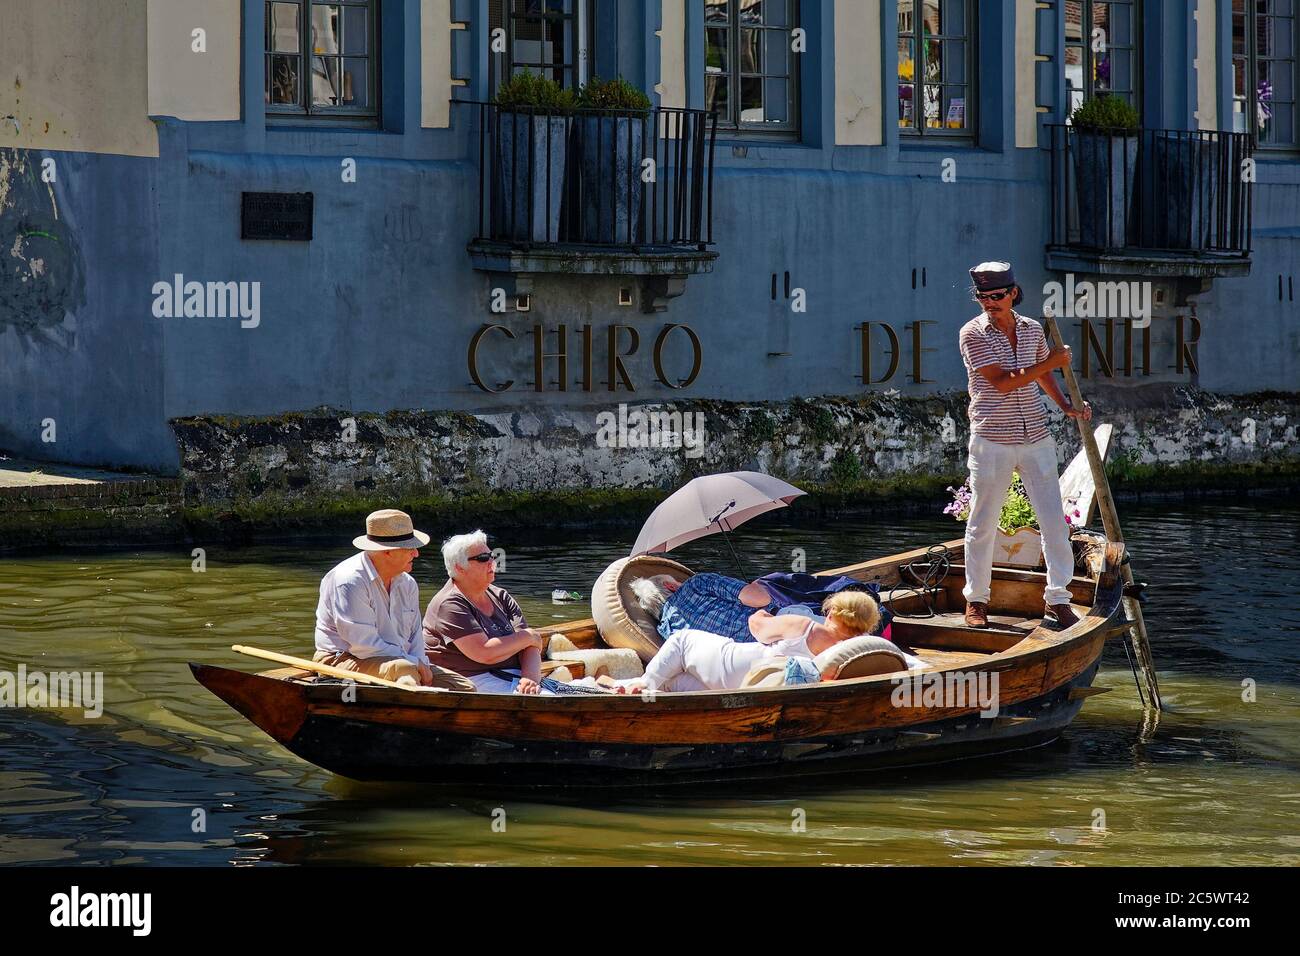 small boat, four tourists relaxing, boatman steering with paddle, job, old wood boat, vacation, canal, water, Flanders, Europe, Ghent; Belgium, summer Stock Photo